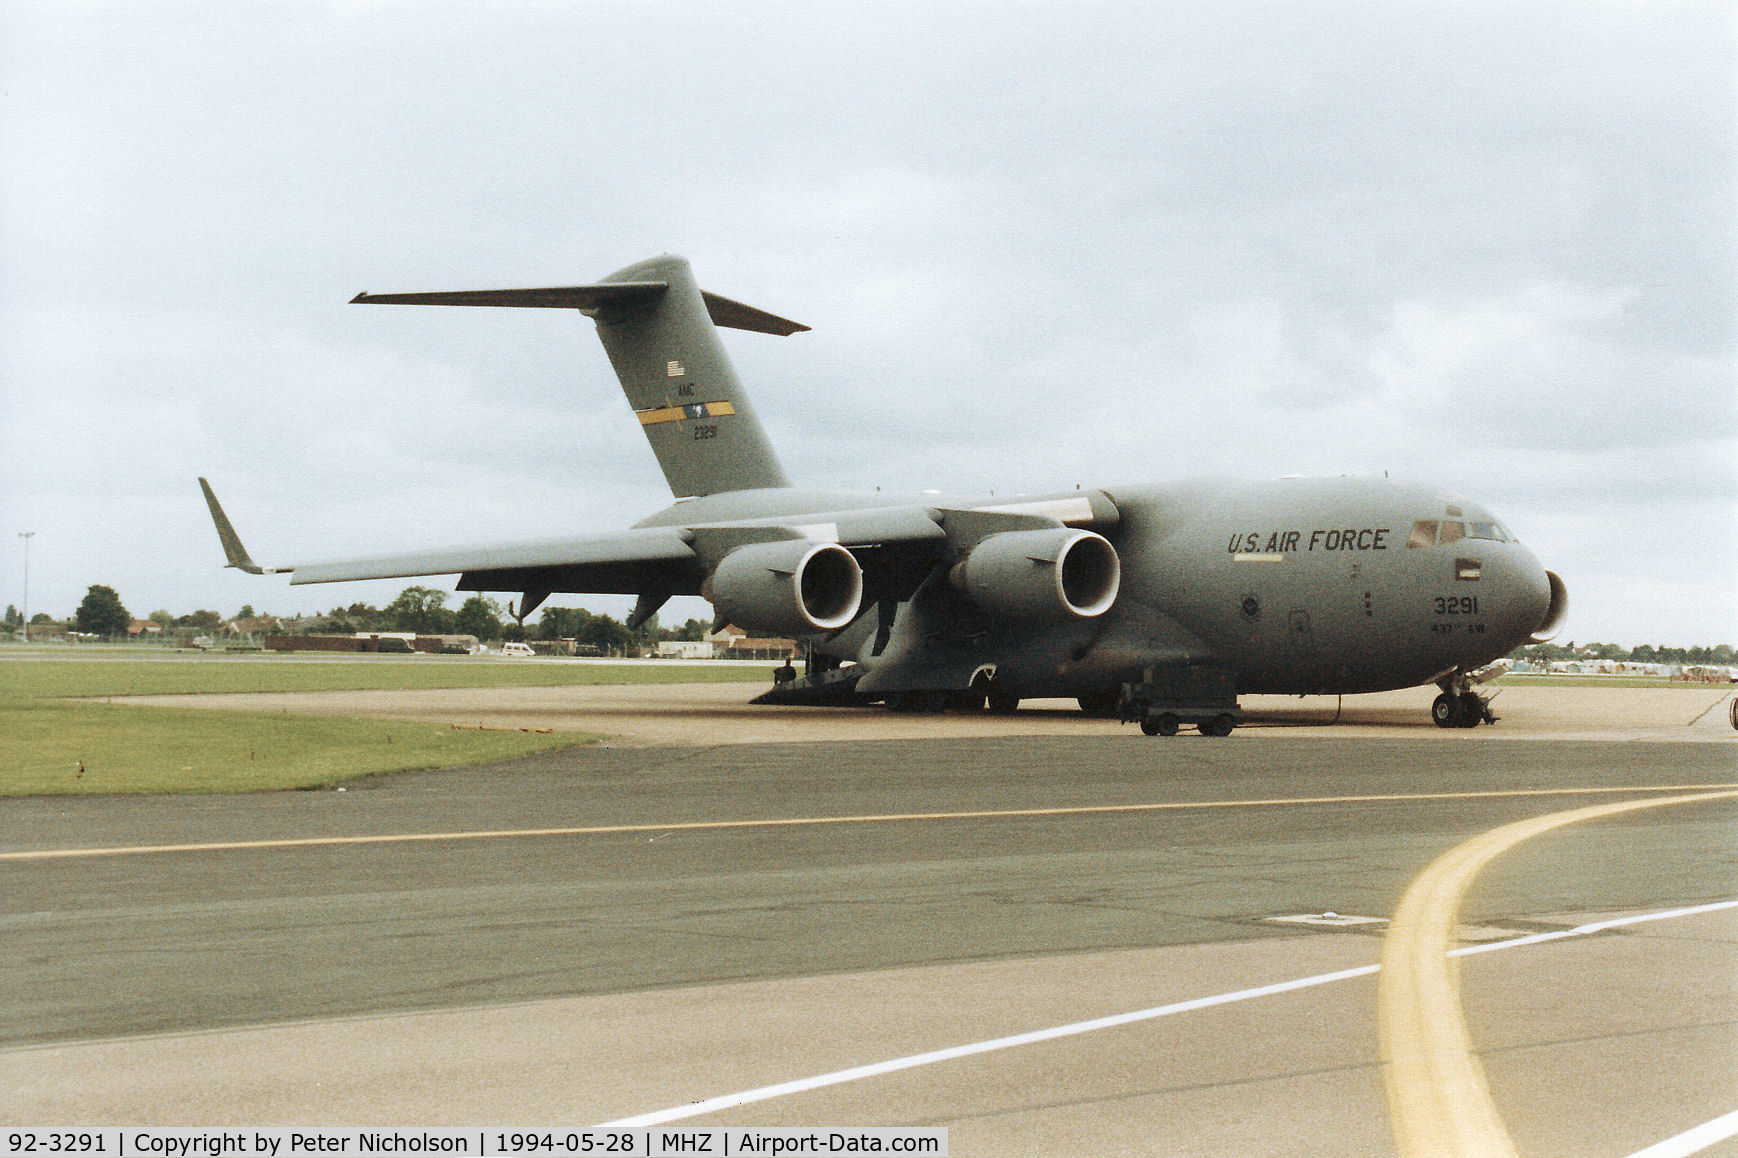 92-3291, 1992 McDonnell Douglas C-17A Globemaster III C/N P-11, C-17A Globemaster of 437th Airlift Wing at Charleston AFB on the flight-line at the 1994 Mildenhall Air Fete.